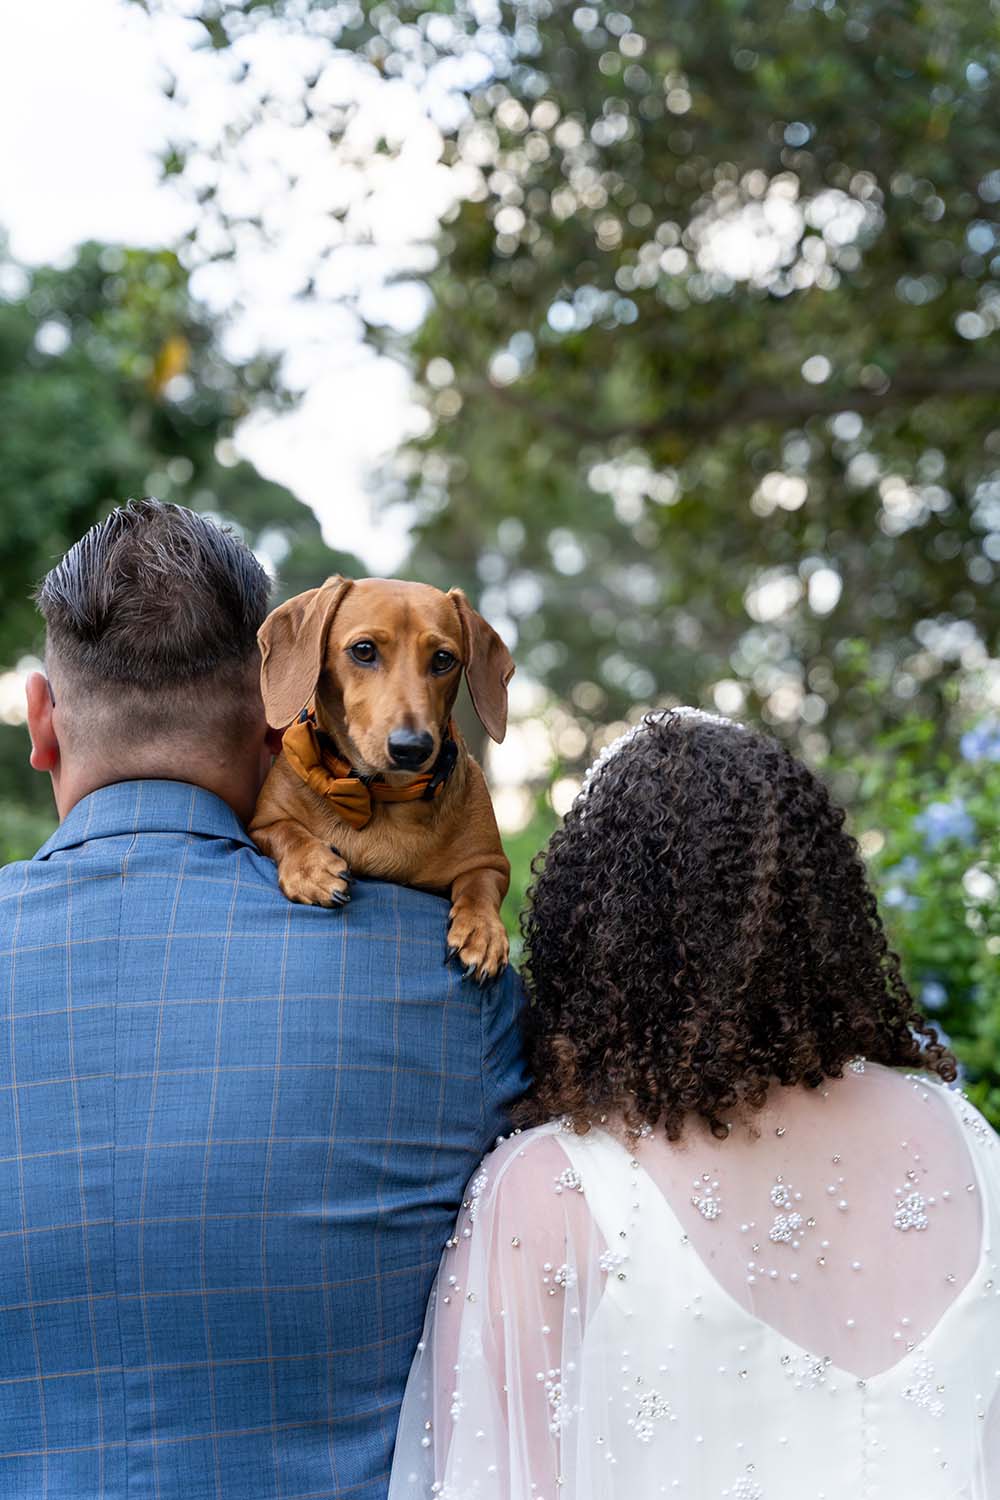 Wedding Photography - Carrying the dog over the shoulder